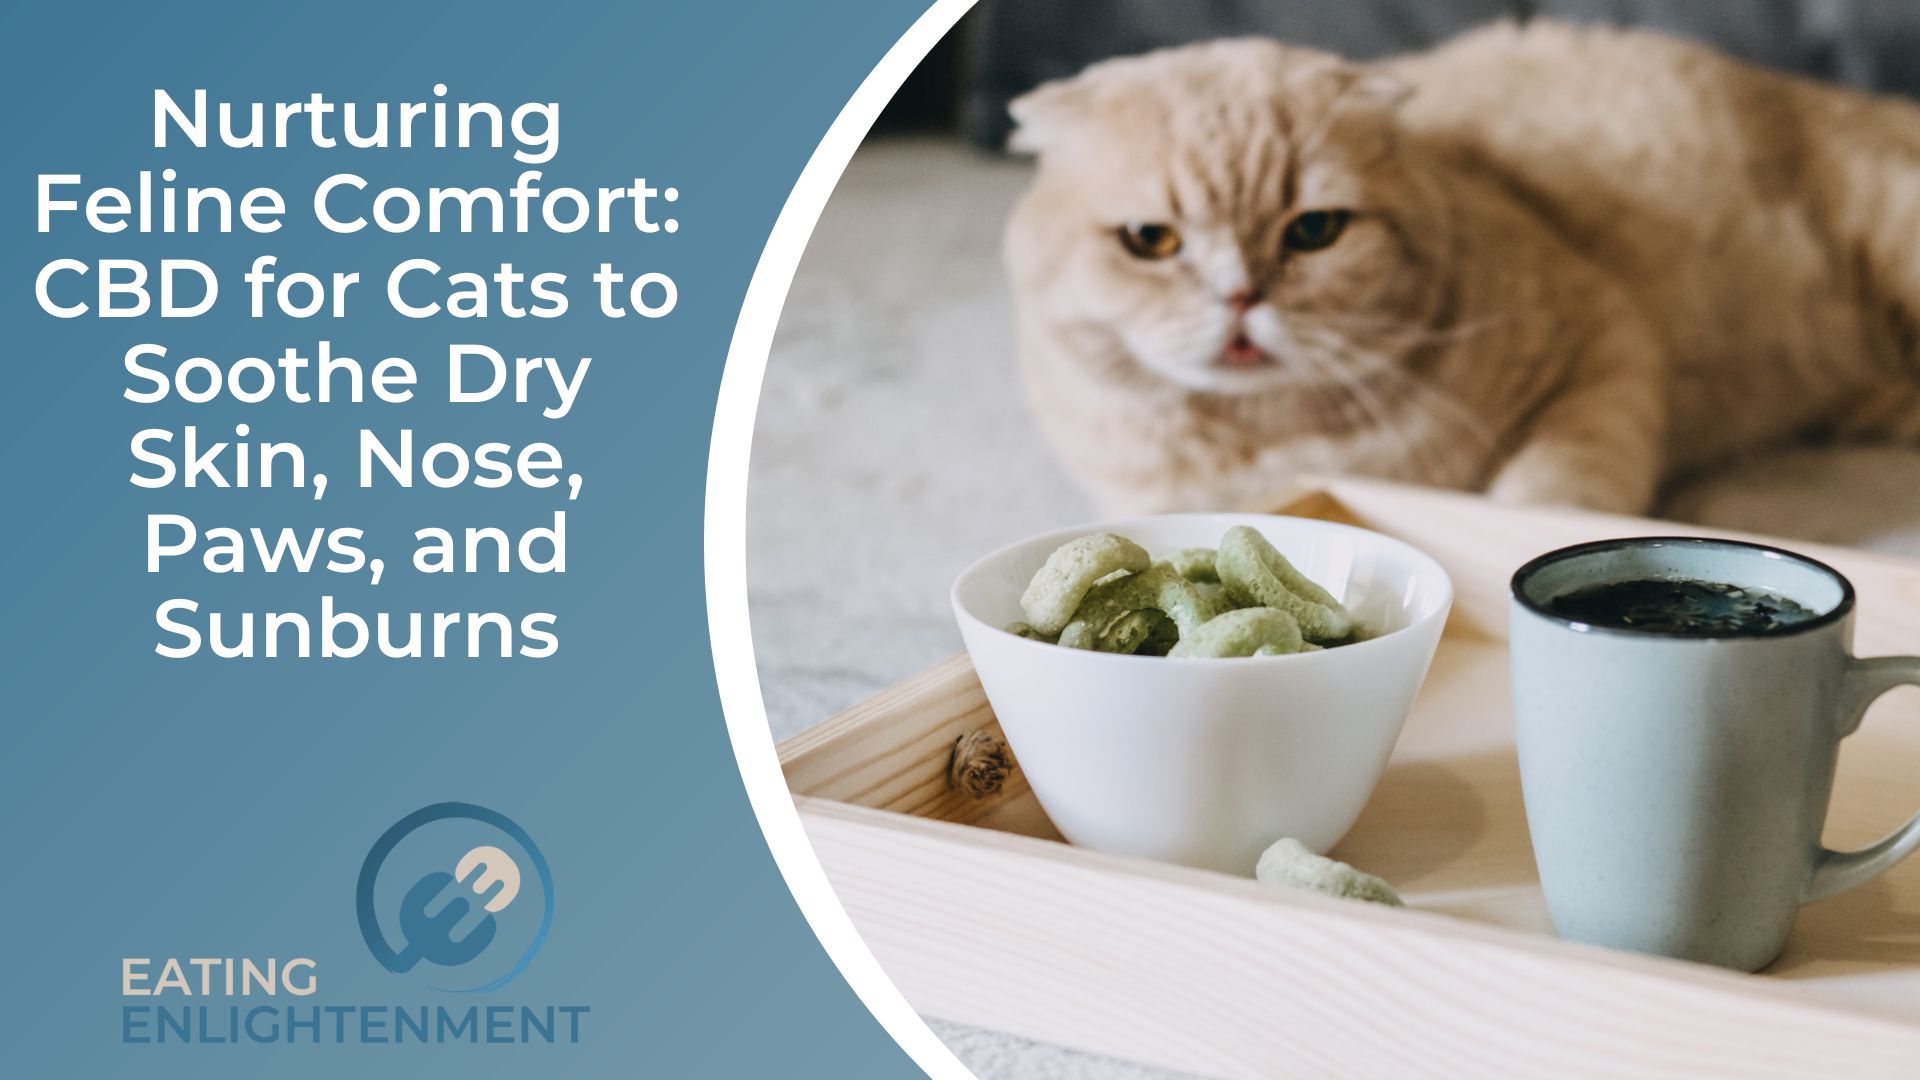 Nurturing Feline Comfort CBD for Cats to Soothe Dry Skin, Nose, Paws, and Sunburns